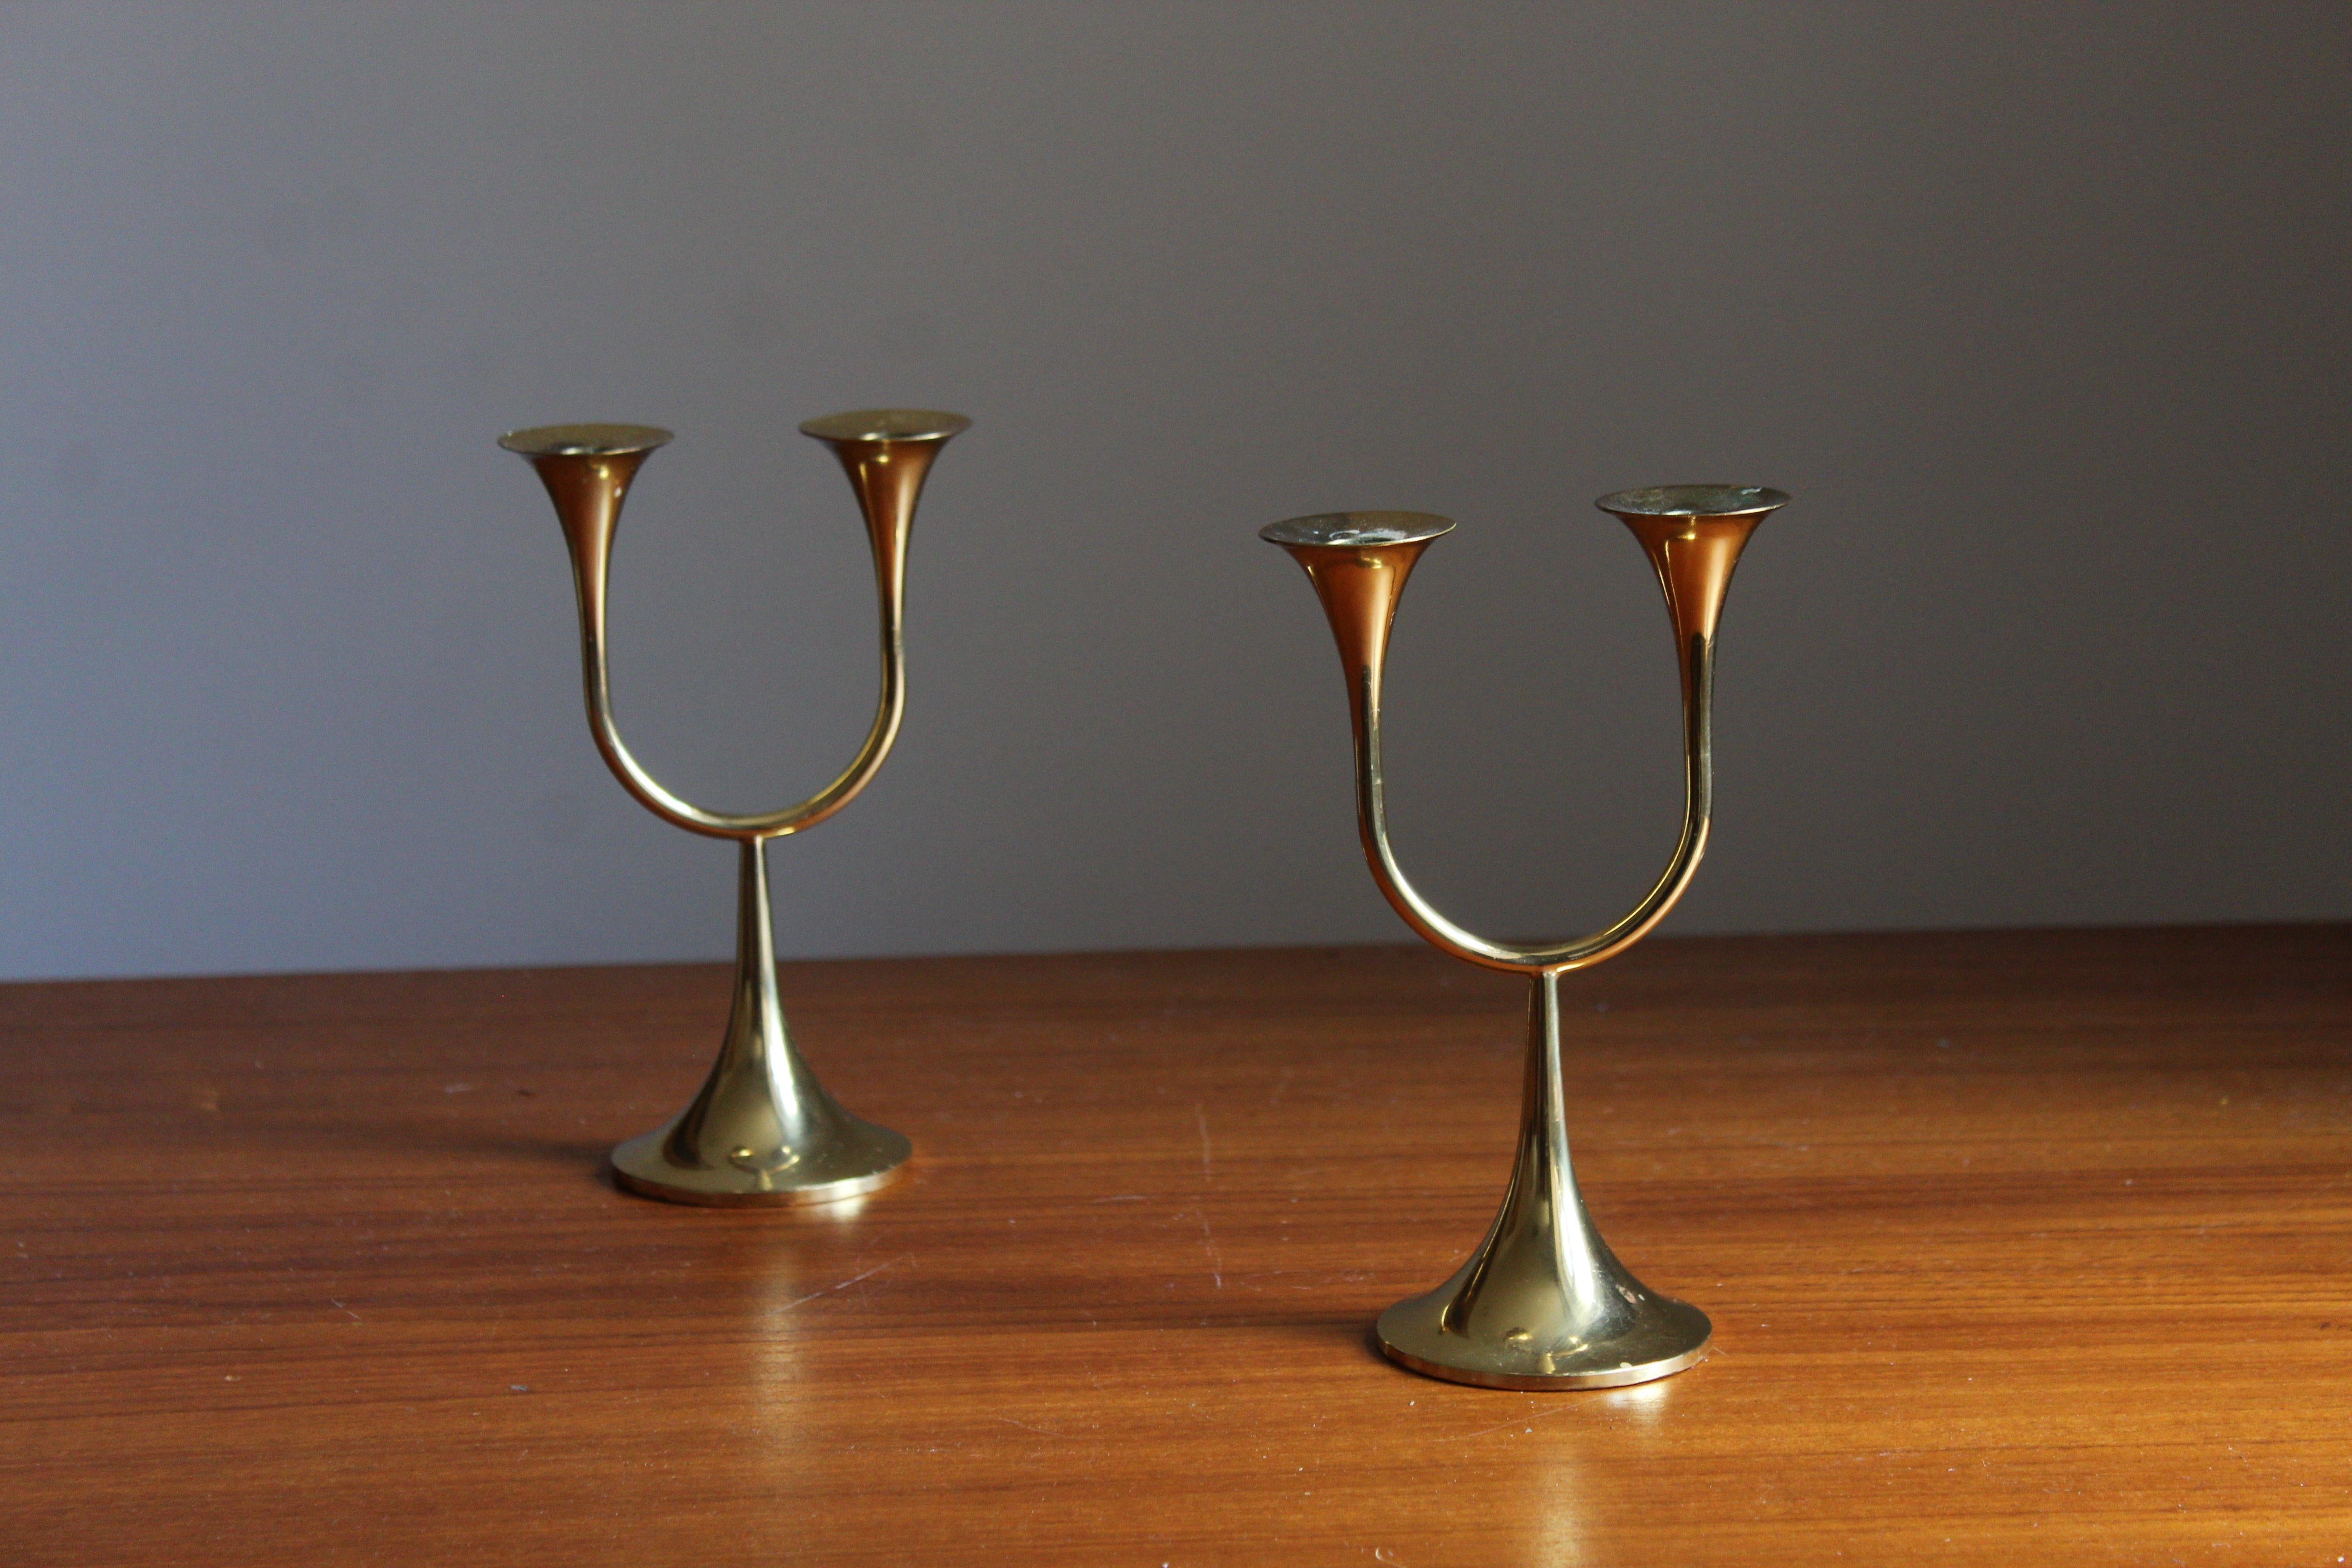 A pair of small candlesticks. Holds small candles. Produced by Gnosjö, Sweden, 1960s-1970s. Stamped.